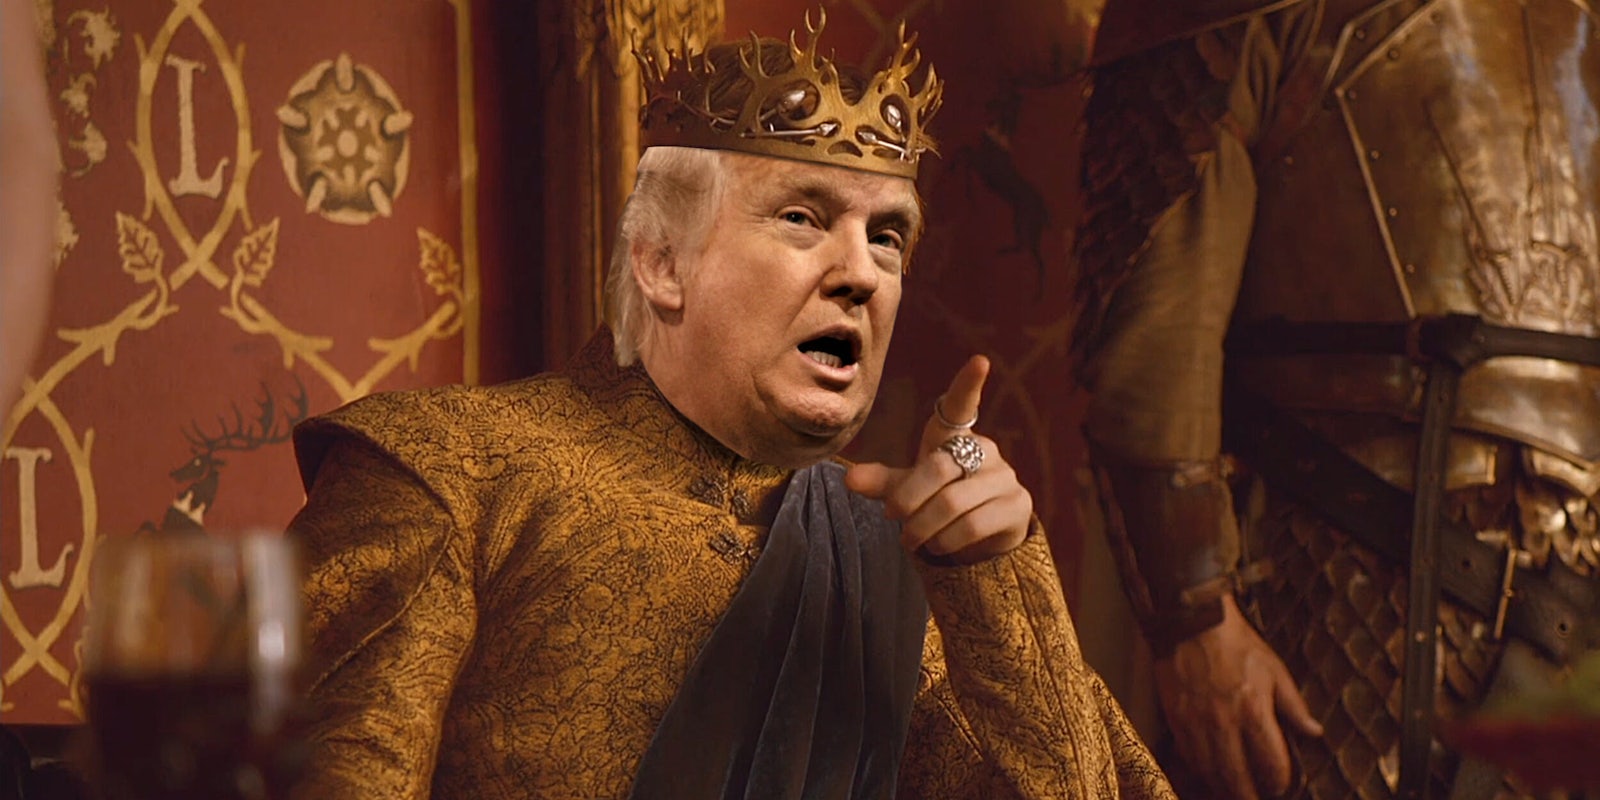 Donald Trump as King Joffrey from Game of Thrones